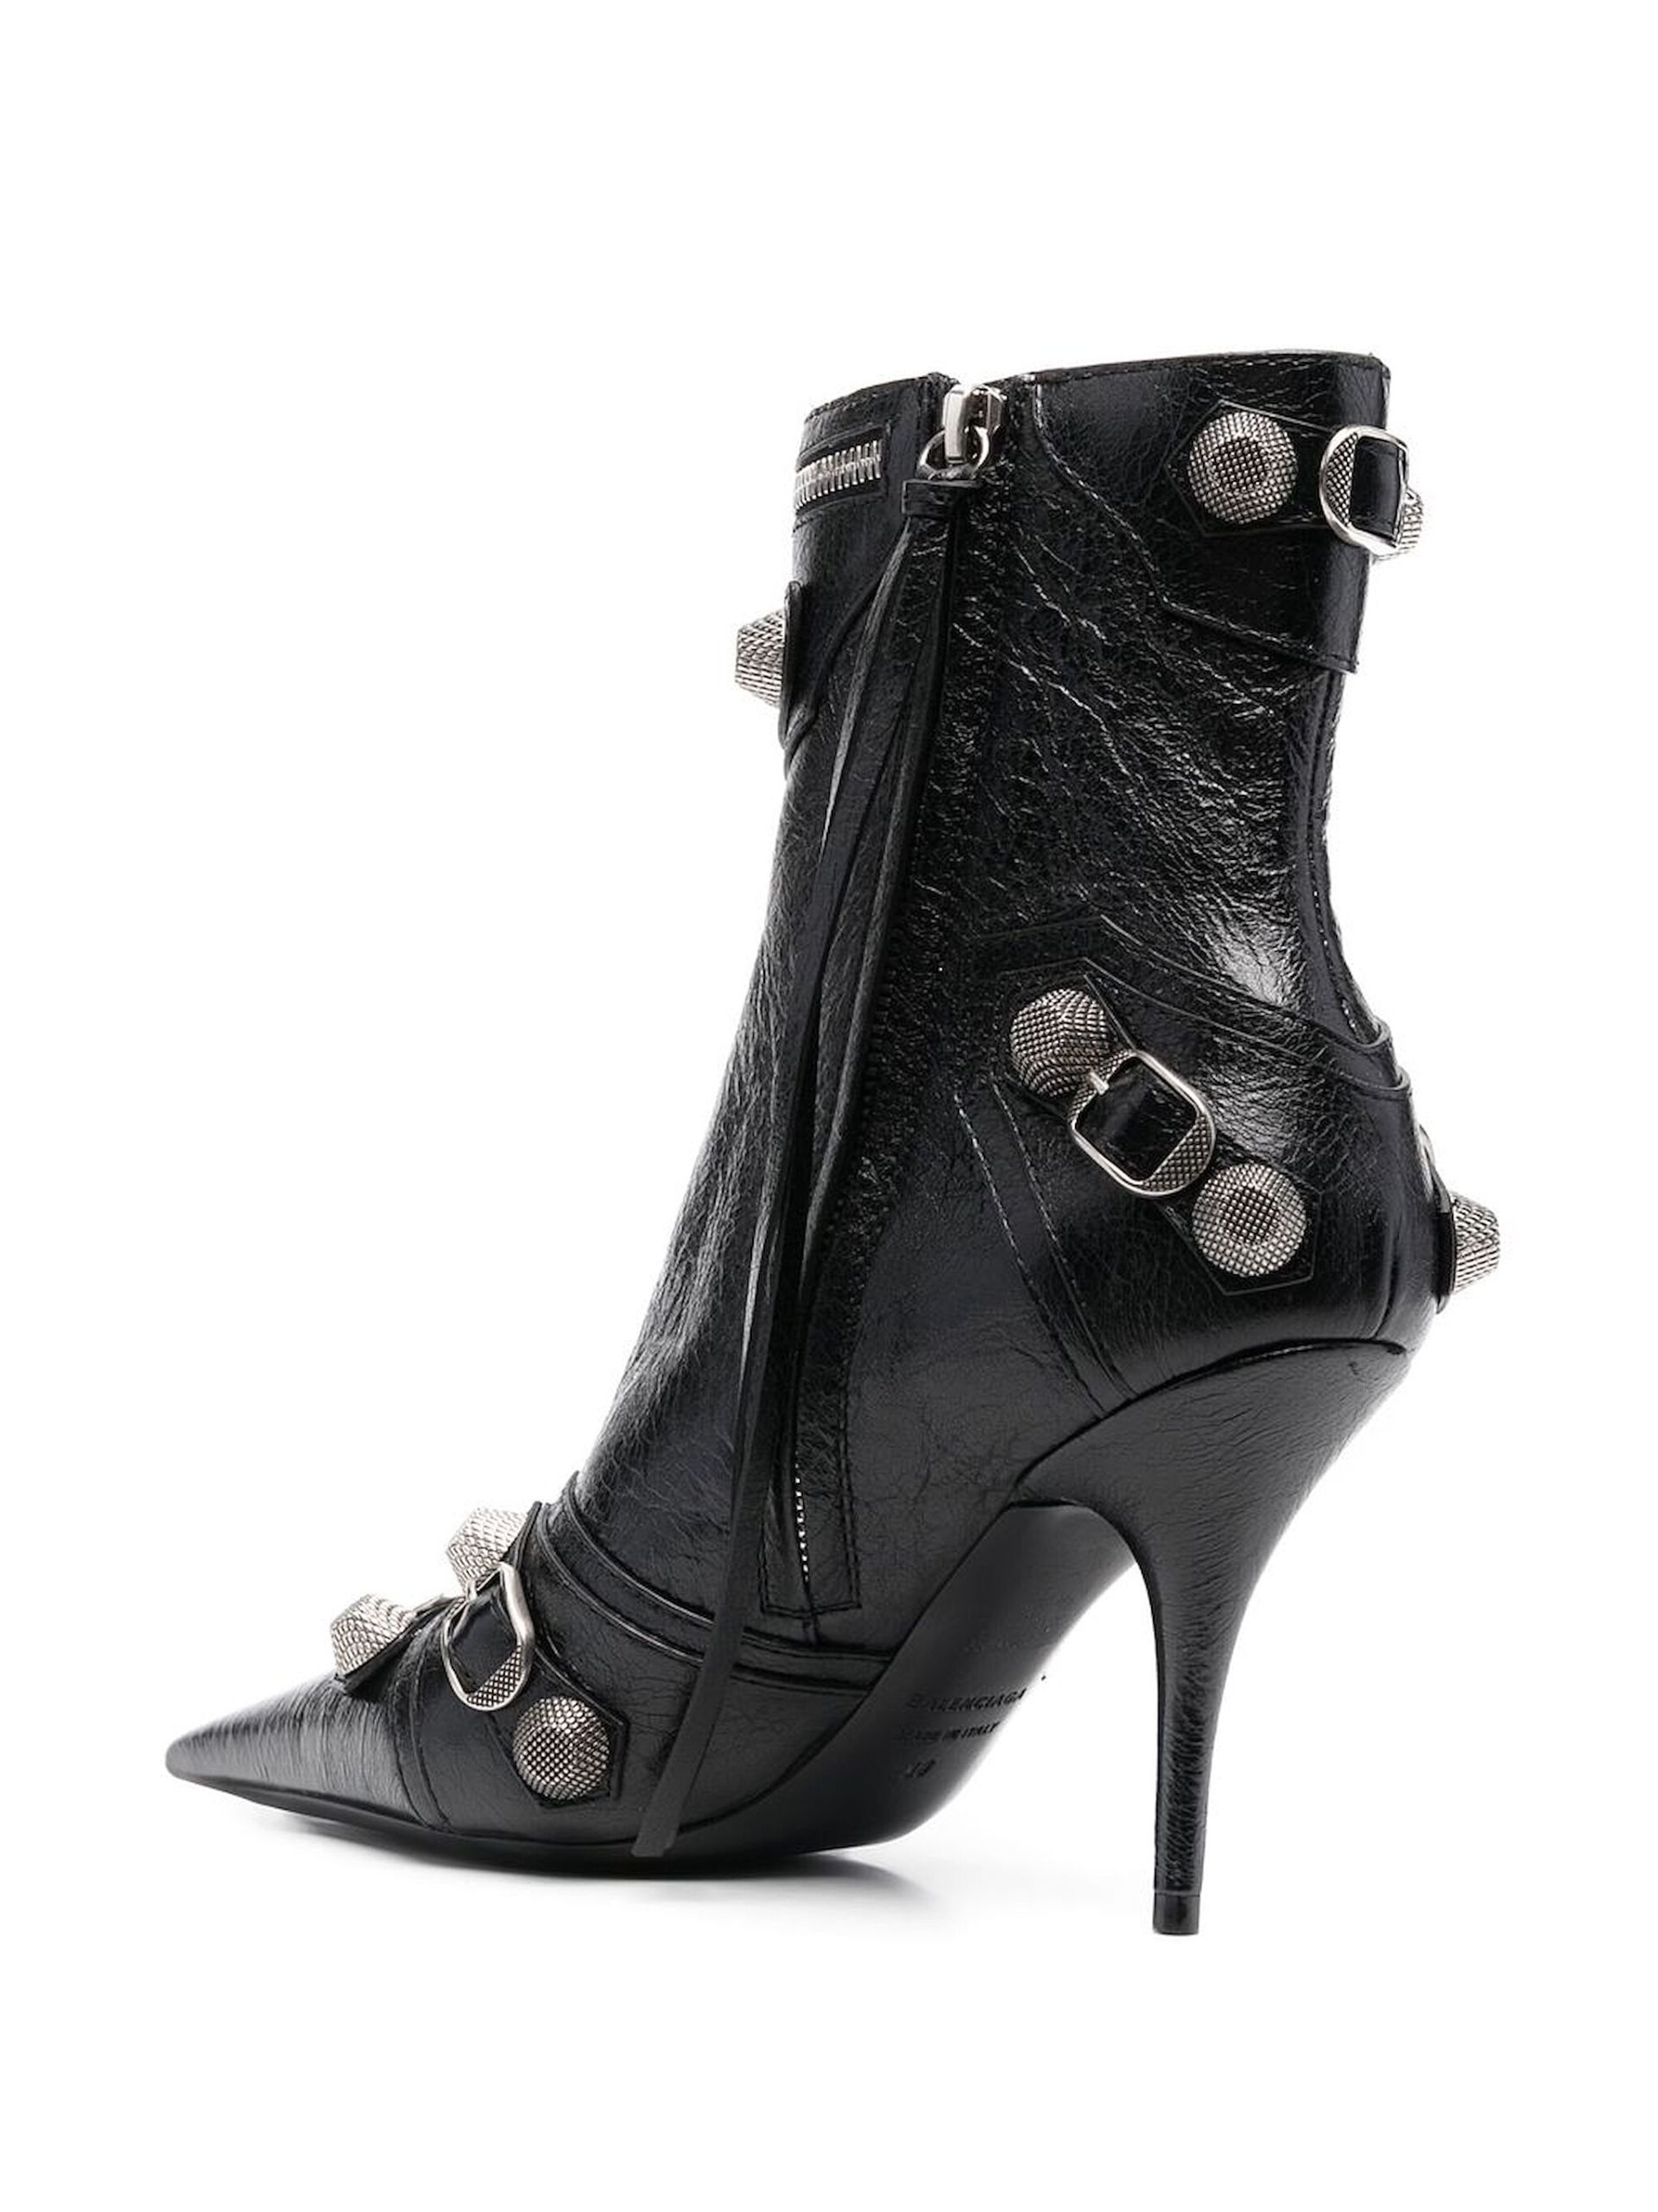 Black Cagole 90 Leather Ankle Boots - 3